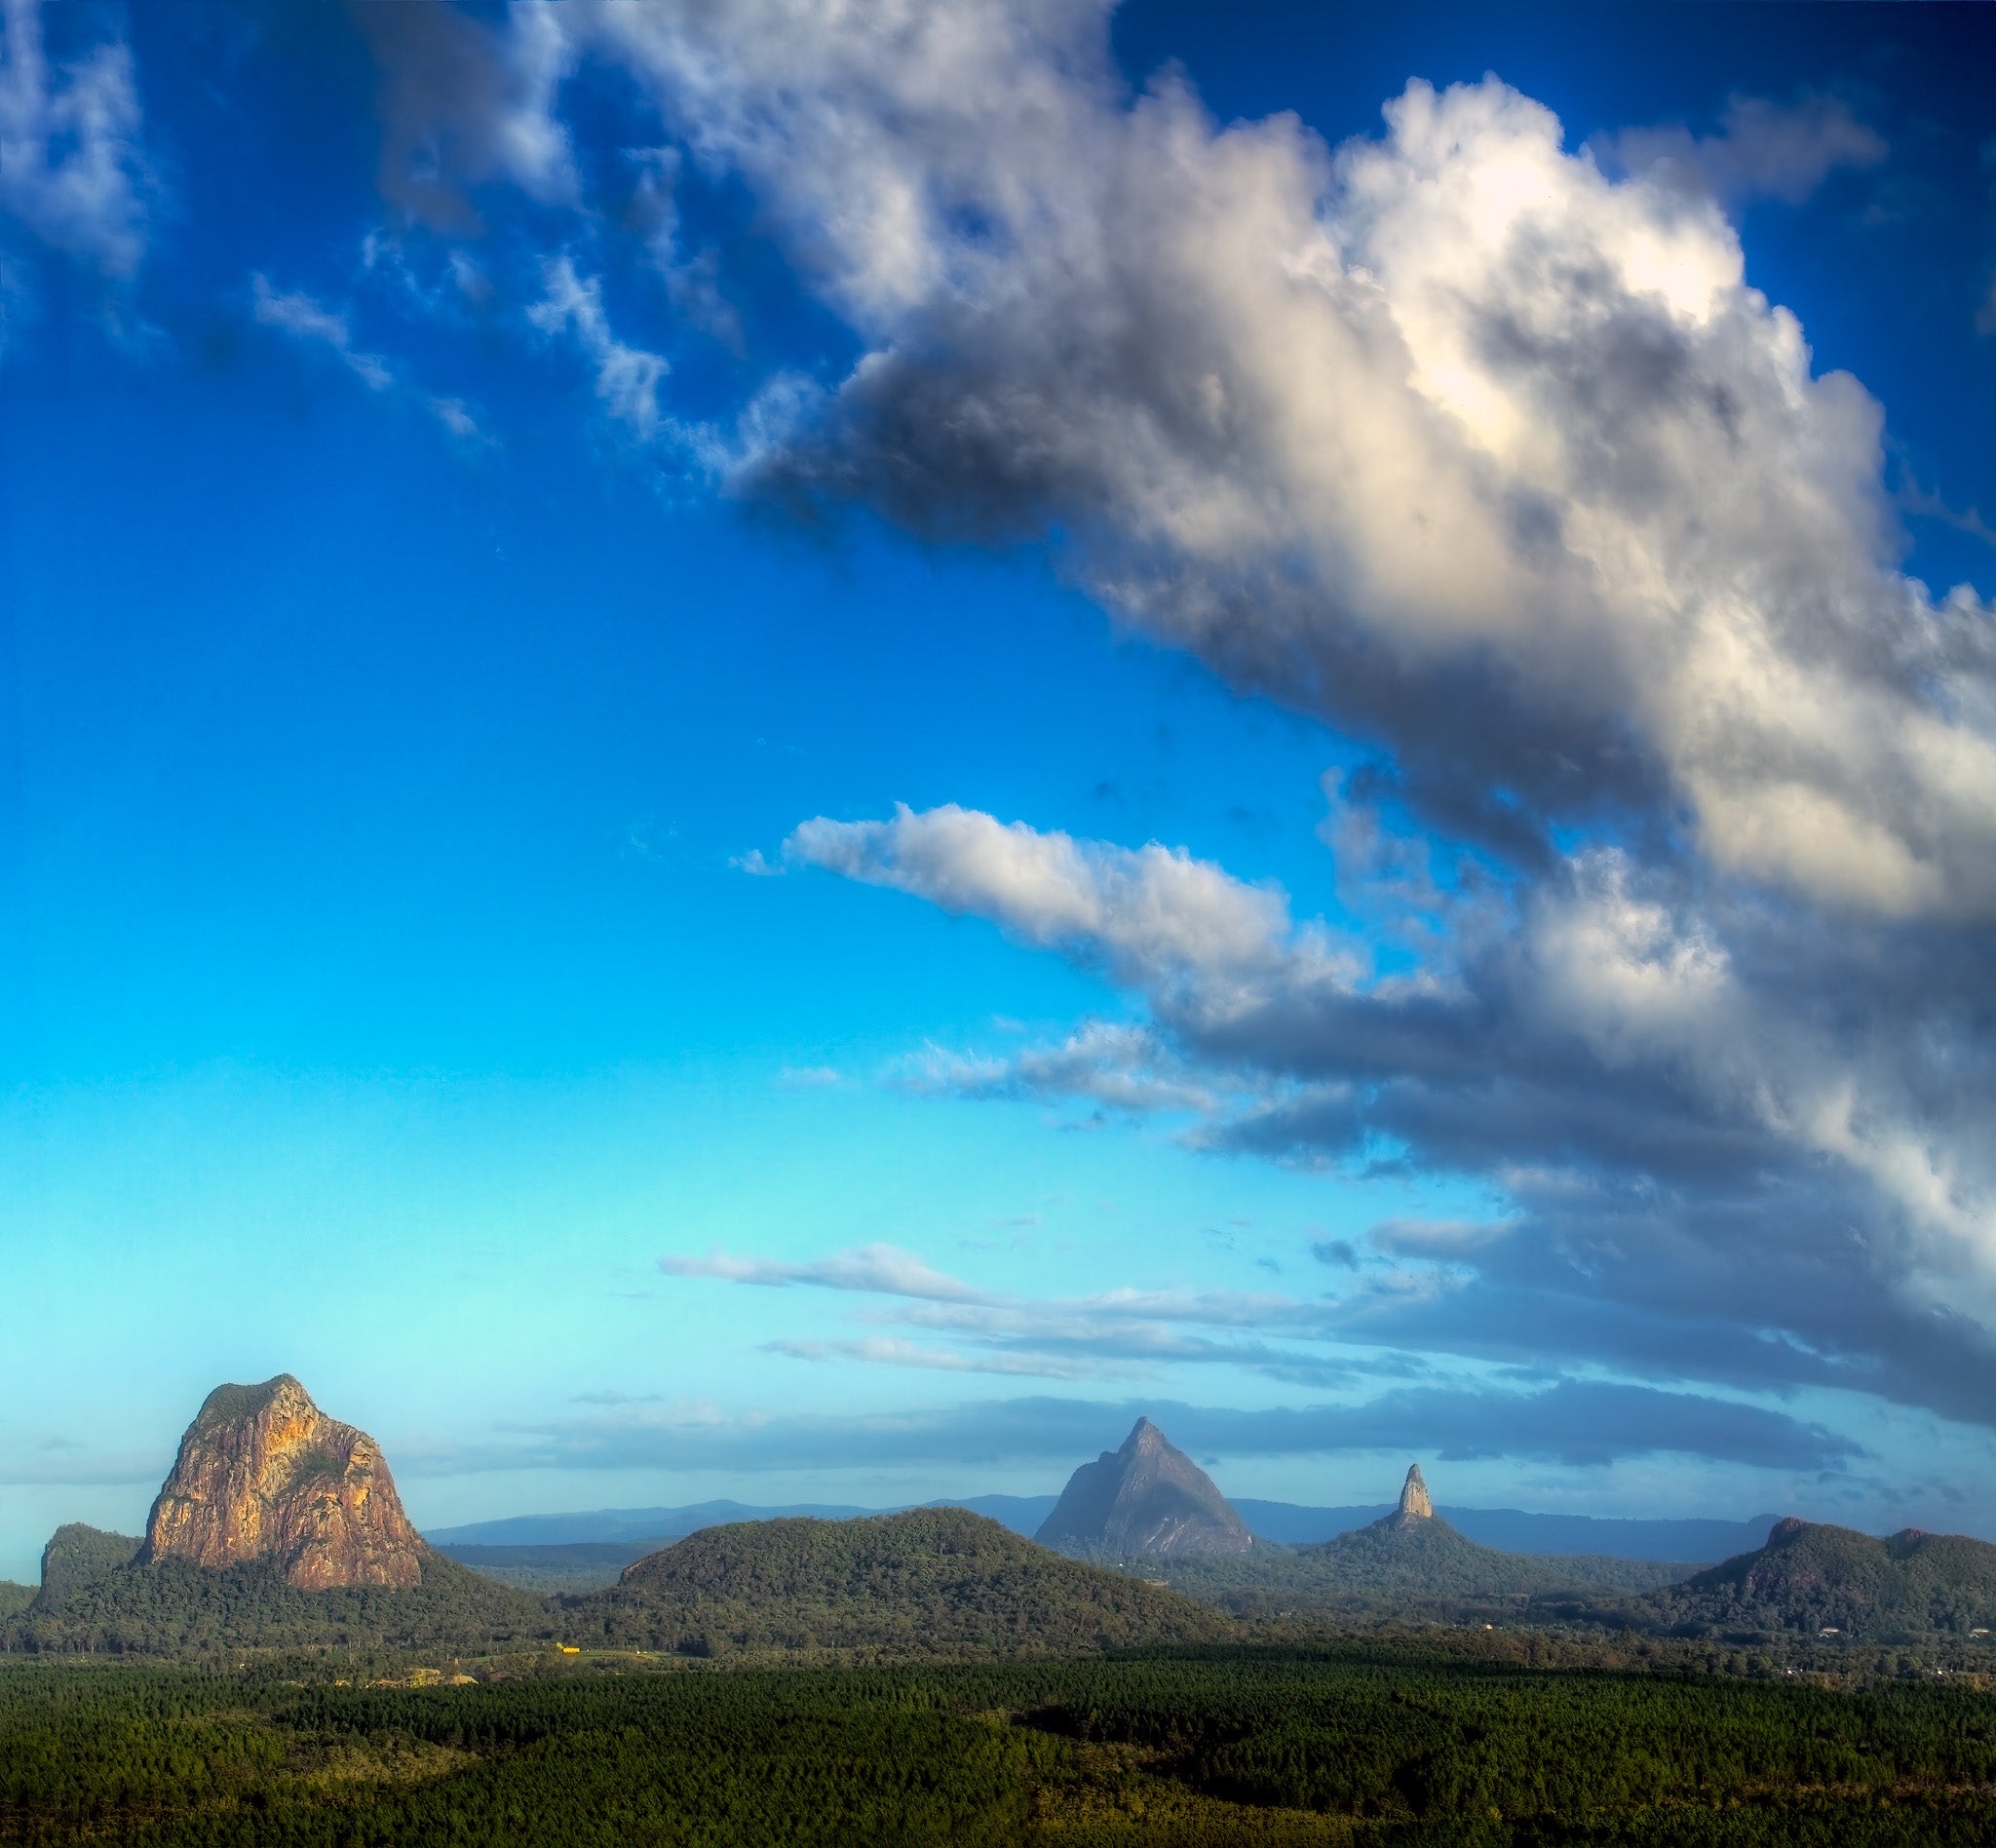 Rapidly encroaching clouds above the Glasshouse Mountains taken from atop Wild Horse Mountain in Queensland Australia